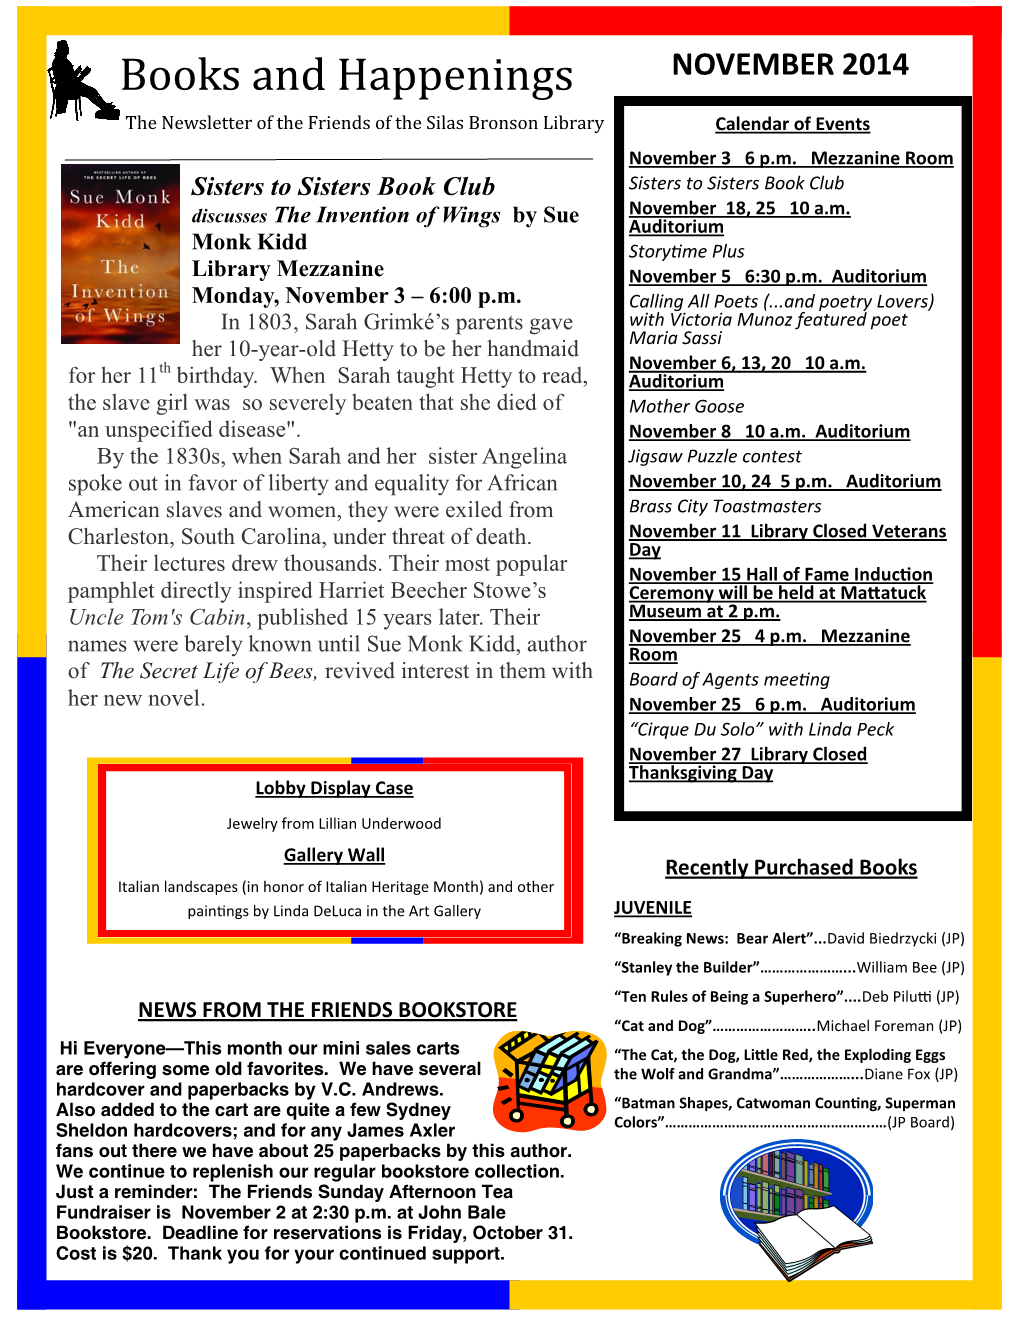 Books and Happenings NOVEMBER 2014 the Newsletter of the Friends of the Silas Bronson Library Calendar of Events November 3 6 P.M